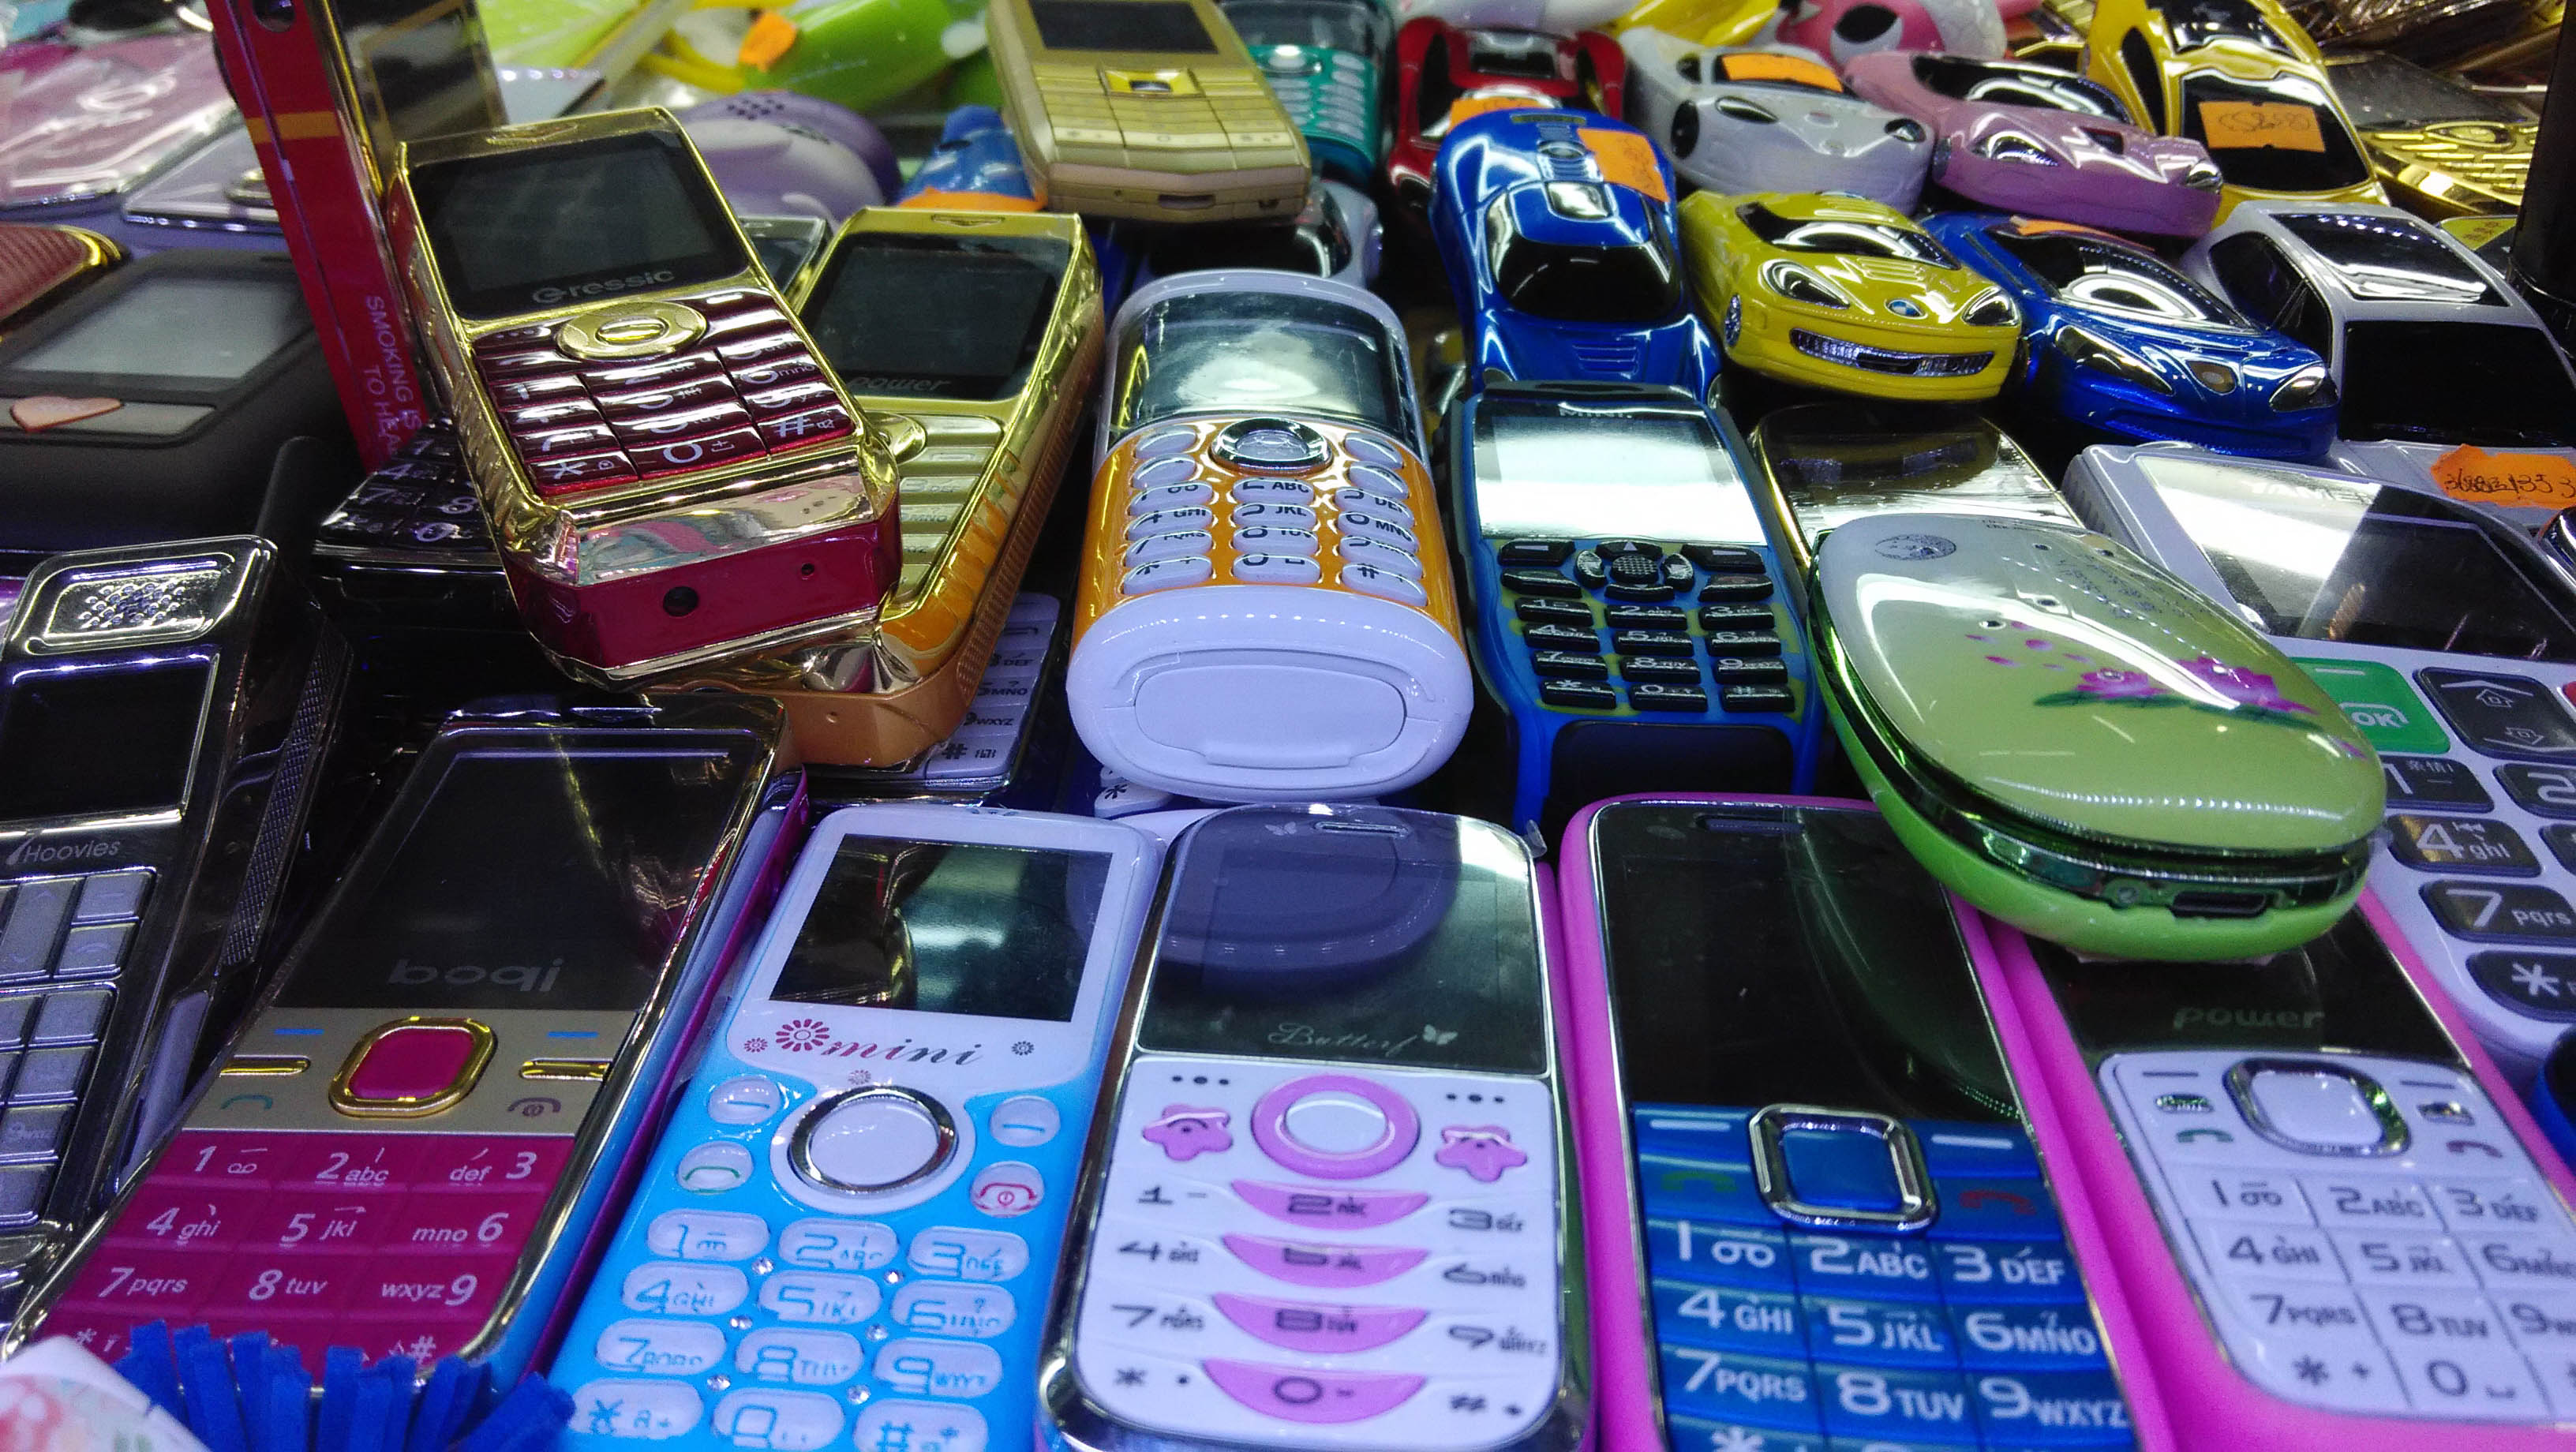 A selection of older counterfeit phones, now being phased out for super fakes